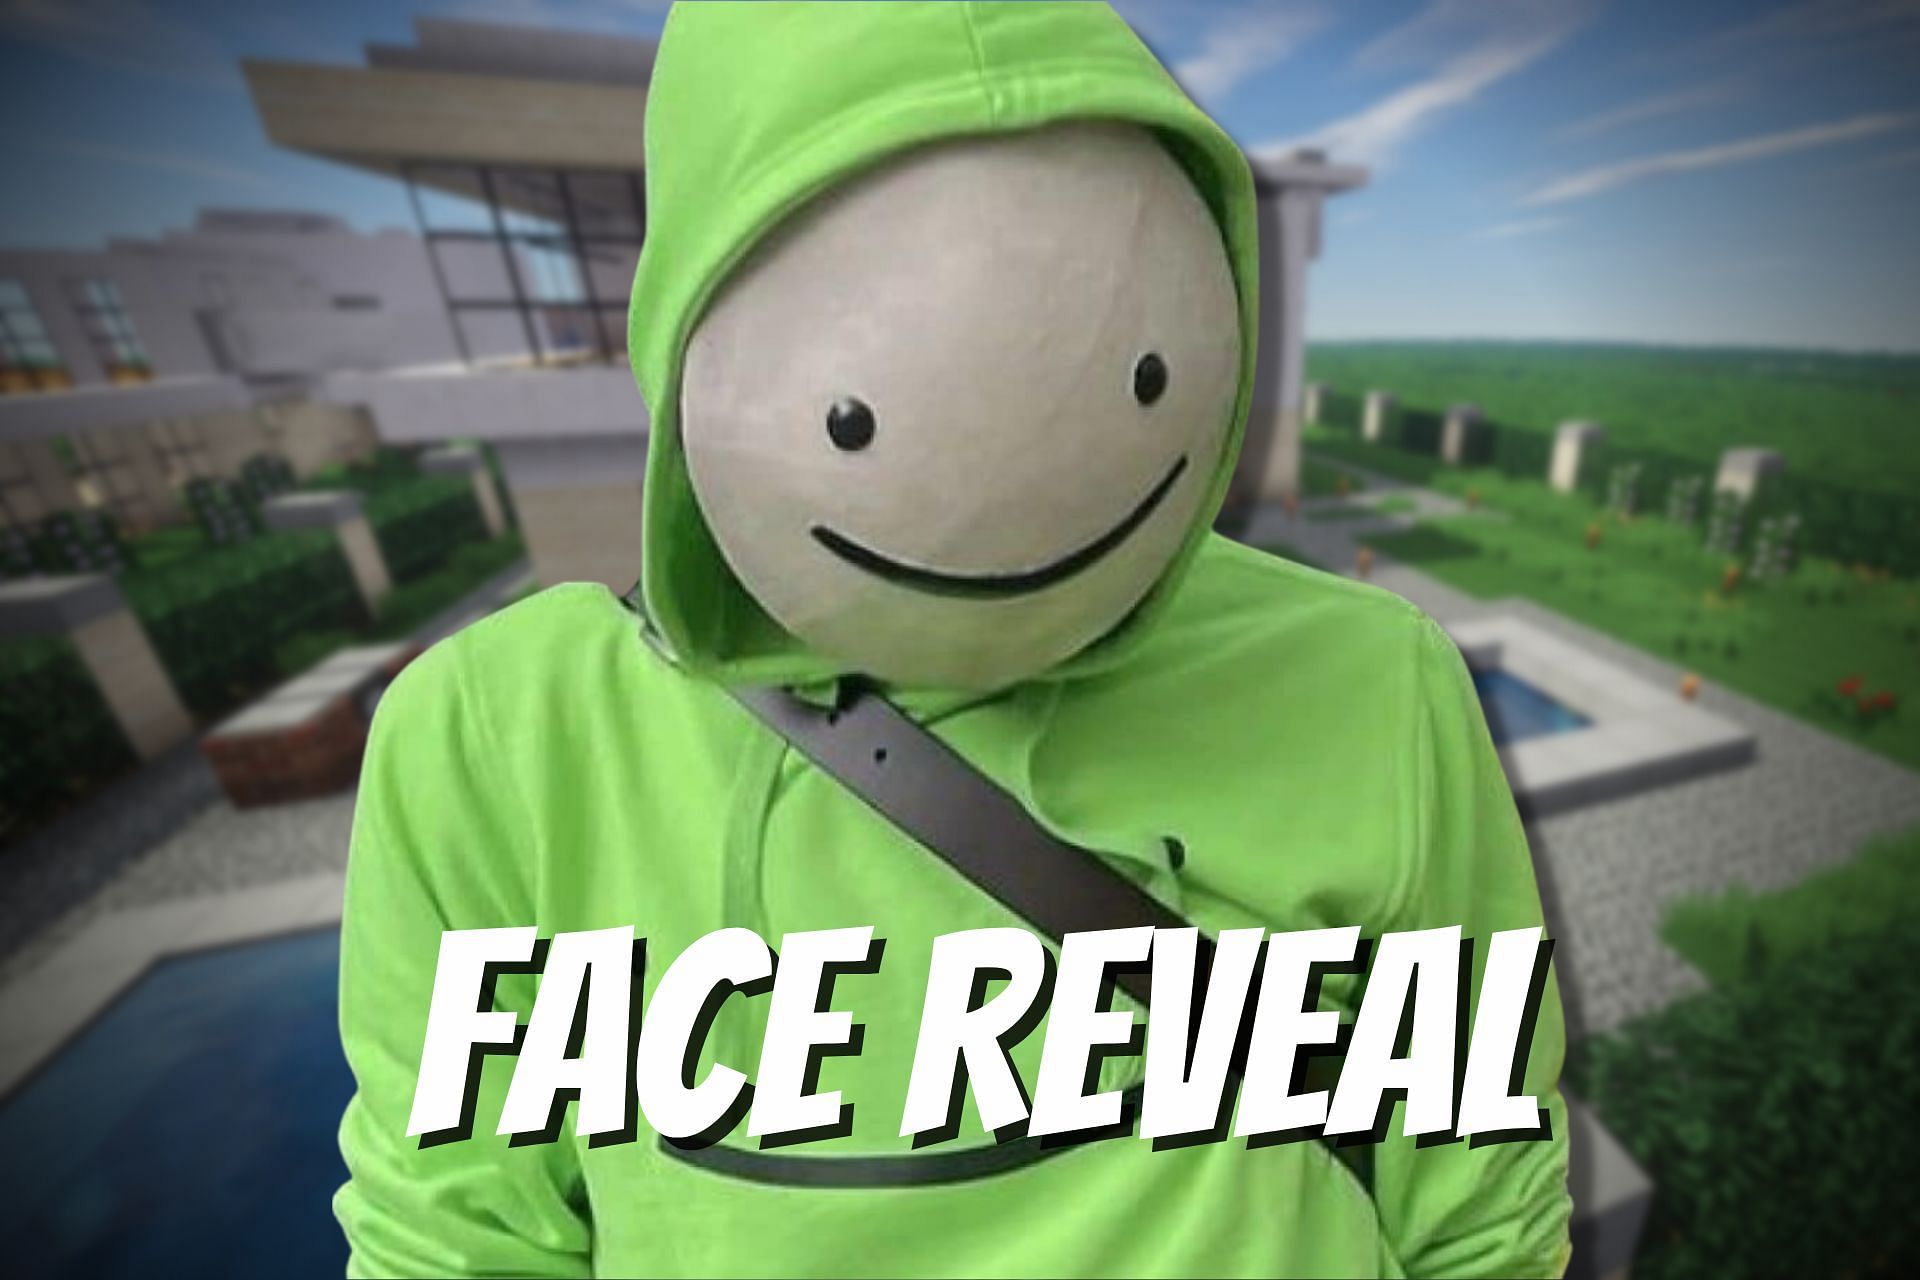 The mask is coming off - Minecraft fame Dream teases much-awaited